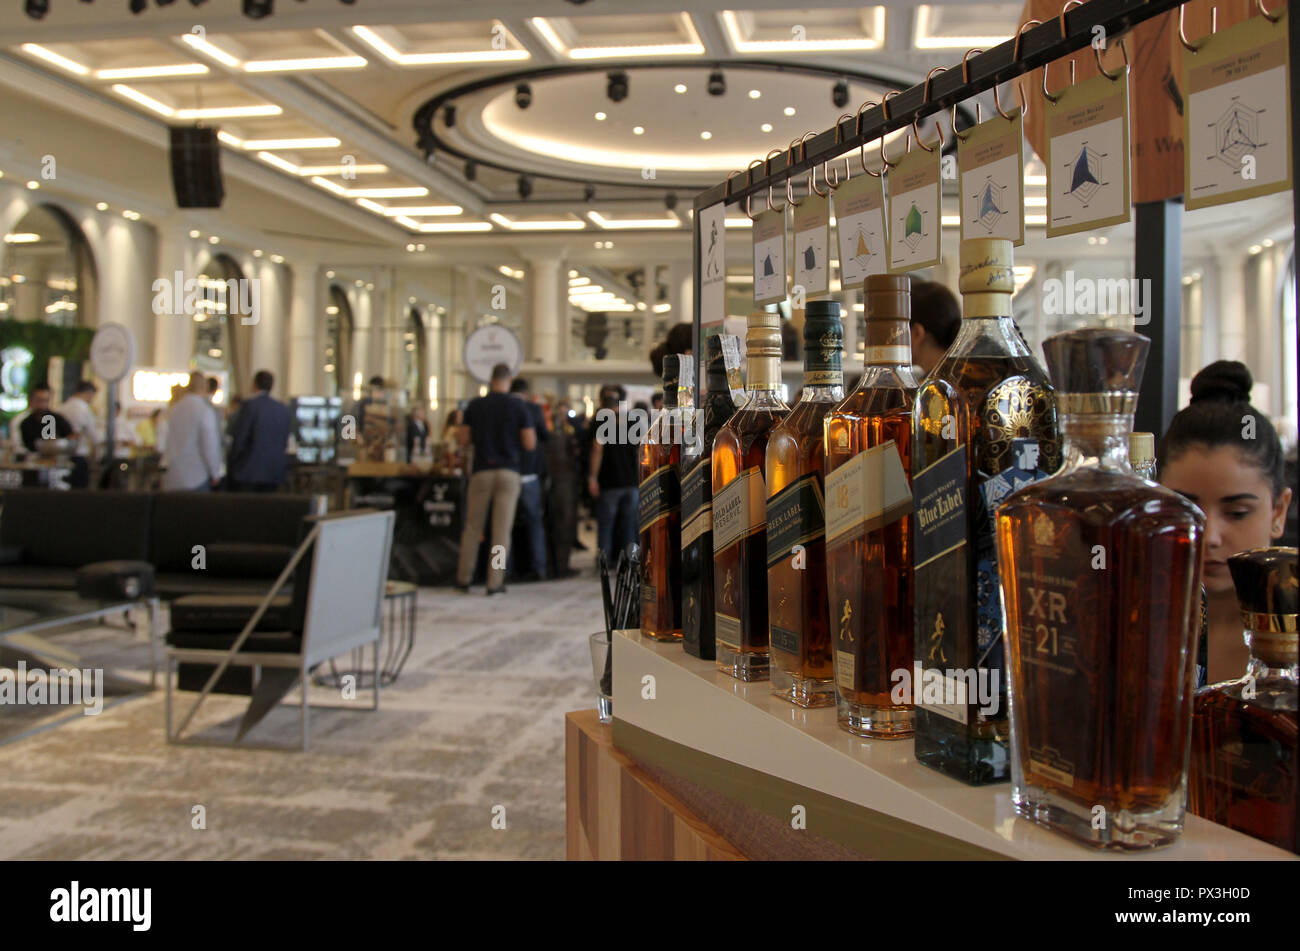 Beirut, Lebanon. 18th Oct, 2018. People visit the 3rd edition of Whisky Live Beirut, in Beirut, Lebanon, on Oct. 18, 2018. The 3rd edition of Whisky Live Beirut opened on Thursday. More than 60 international whisky brands display their products to the public during the three-day event. Credit: Bilal Jawich/Xinhua/Alamy Live News Stock Photo